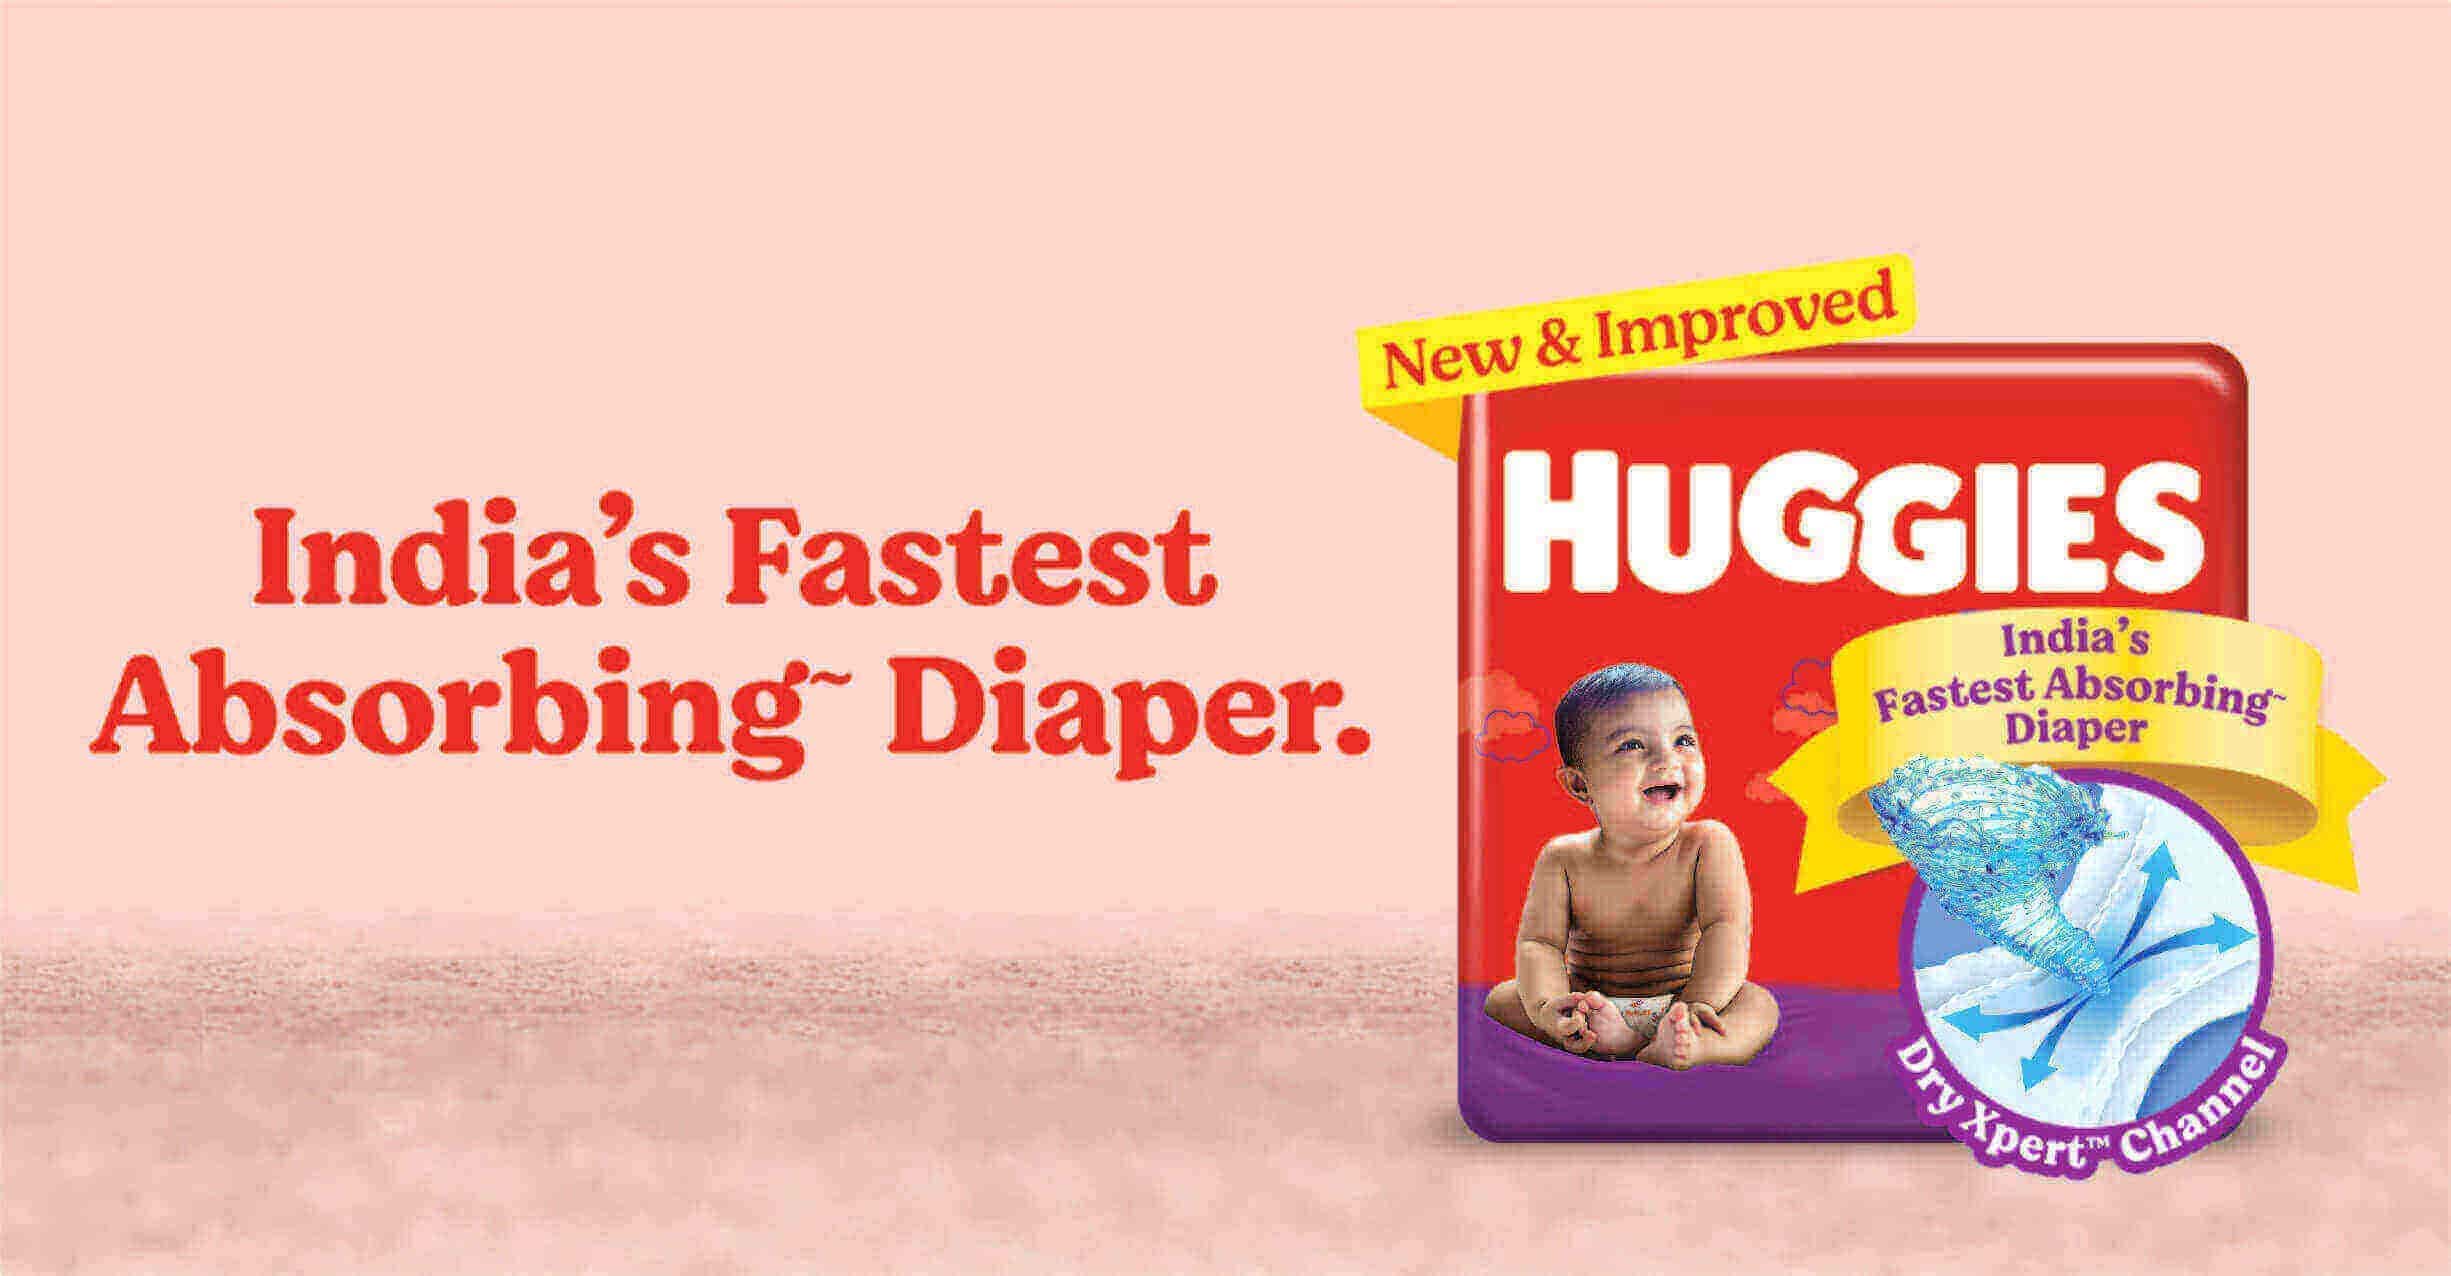 Huggies Wonder Pants Diaper Size New Born/ Extra Small - XS 10 Pieces(Pack  of 4)